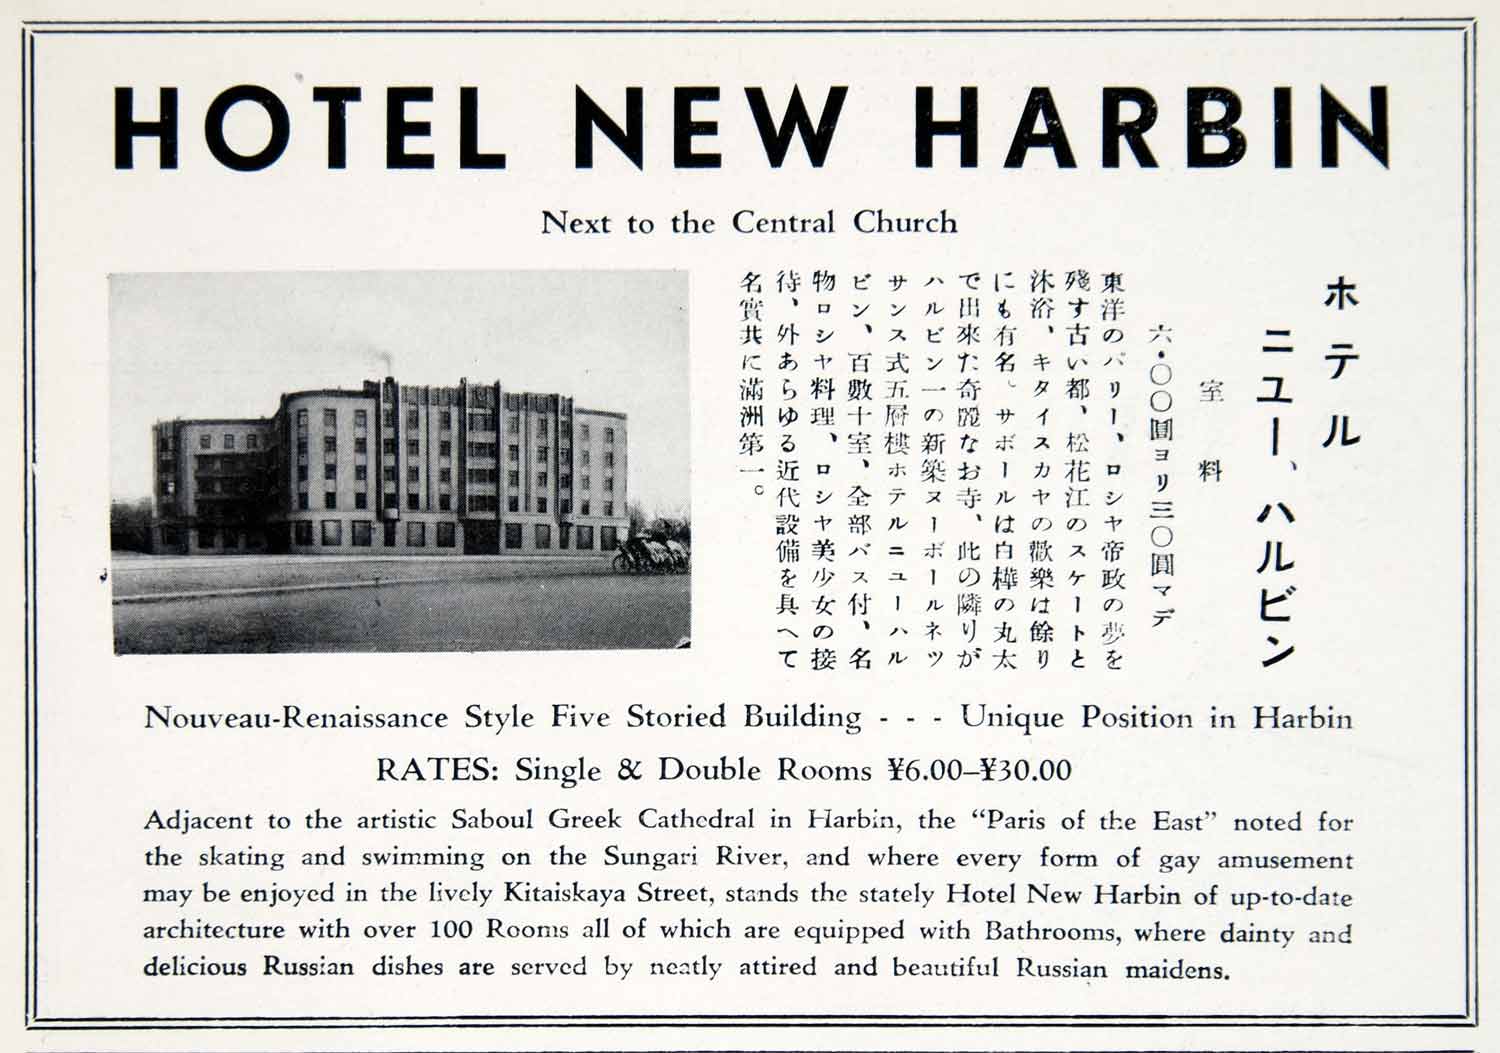 1940 Ad Vintage Hotel New Harbin China Building Russian Cuisine Room Rates GOE1